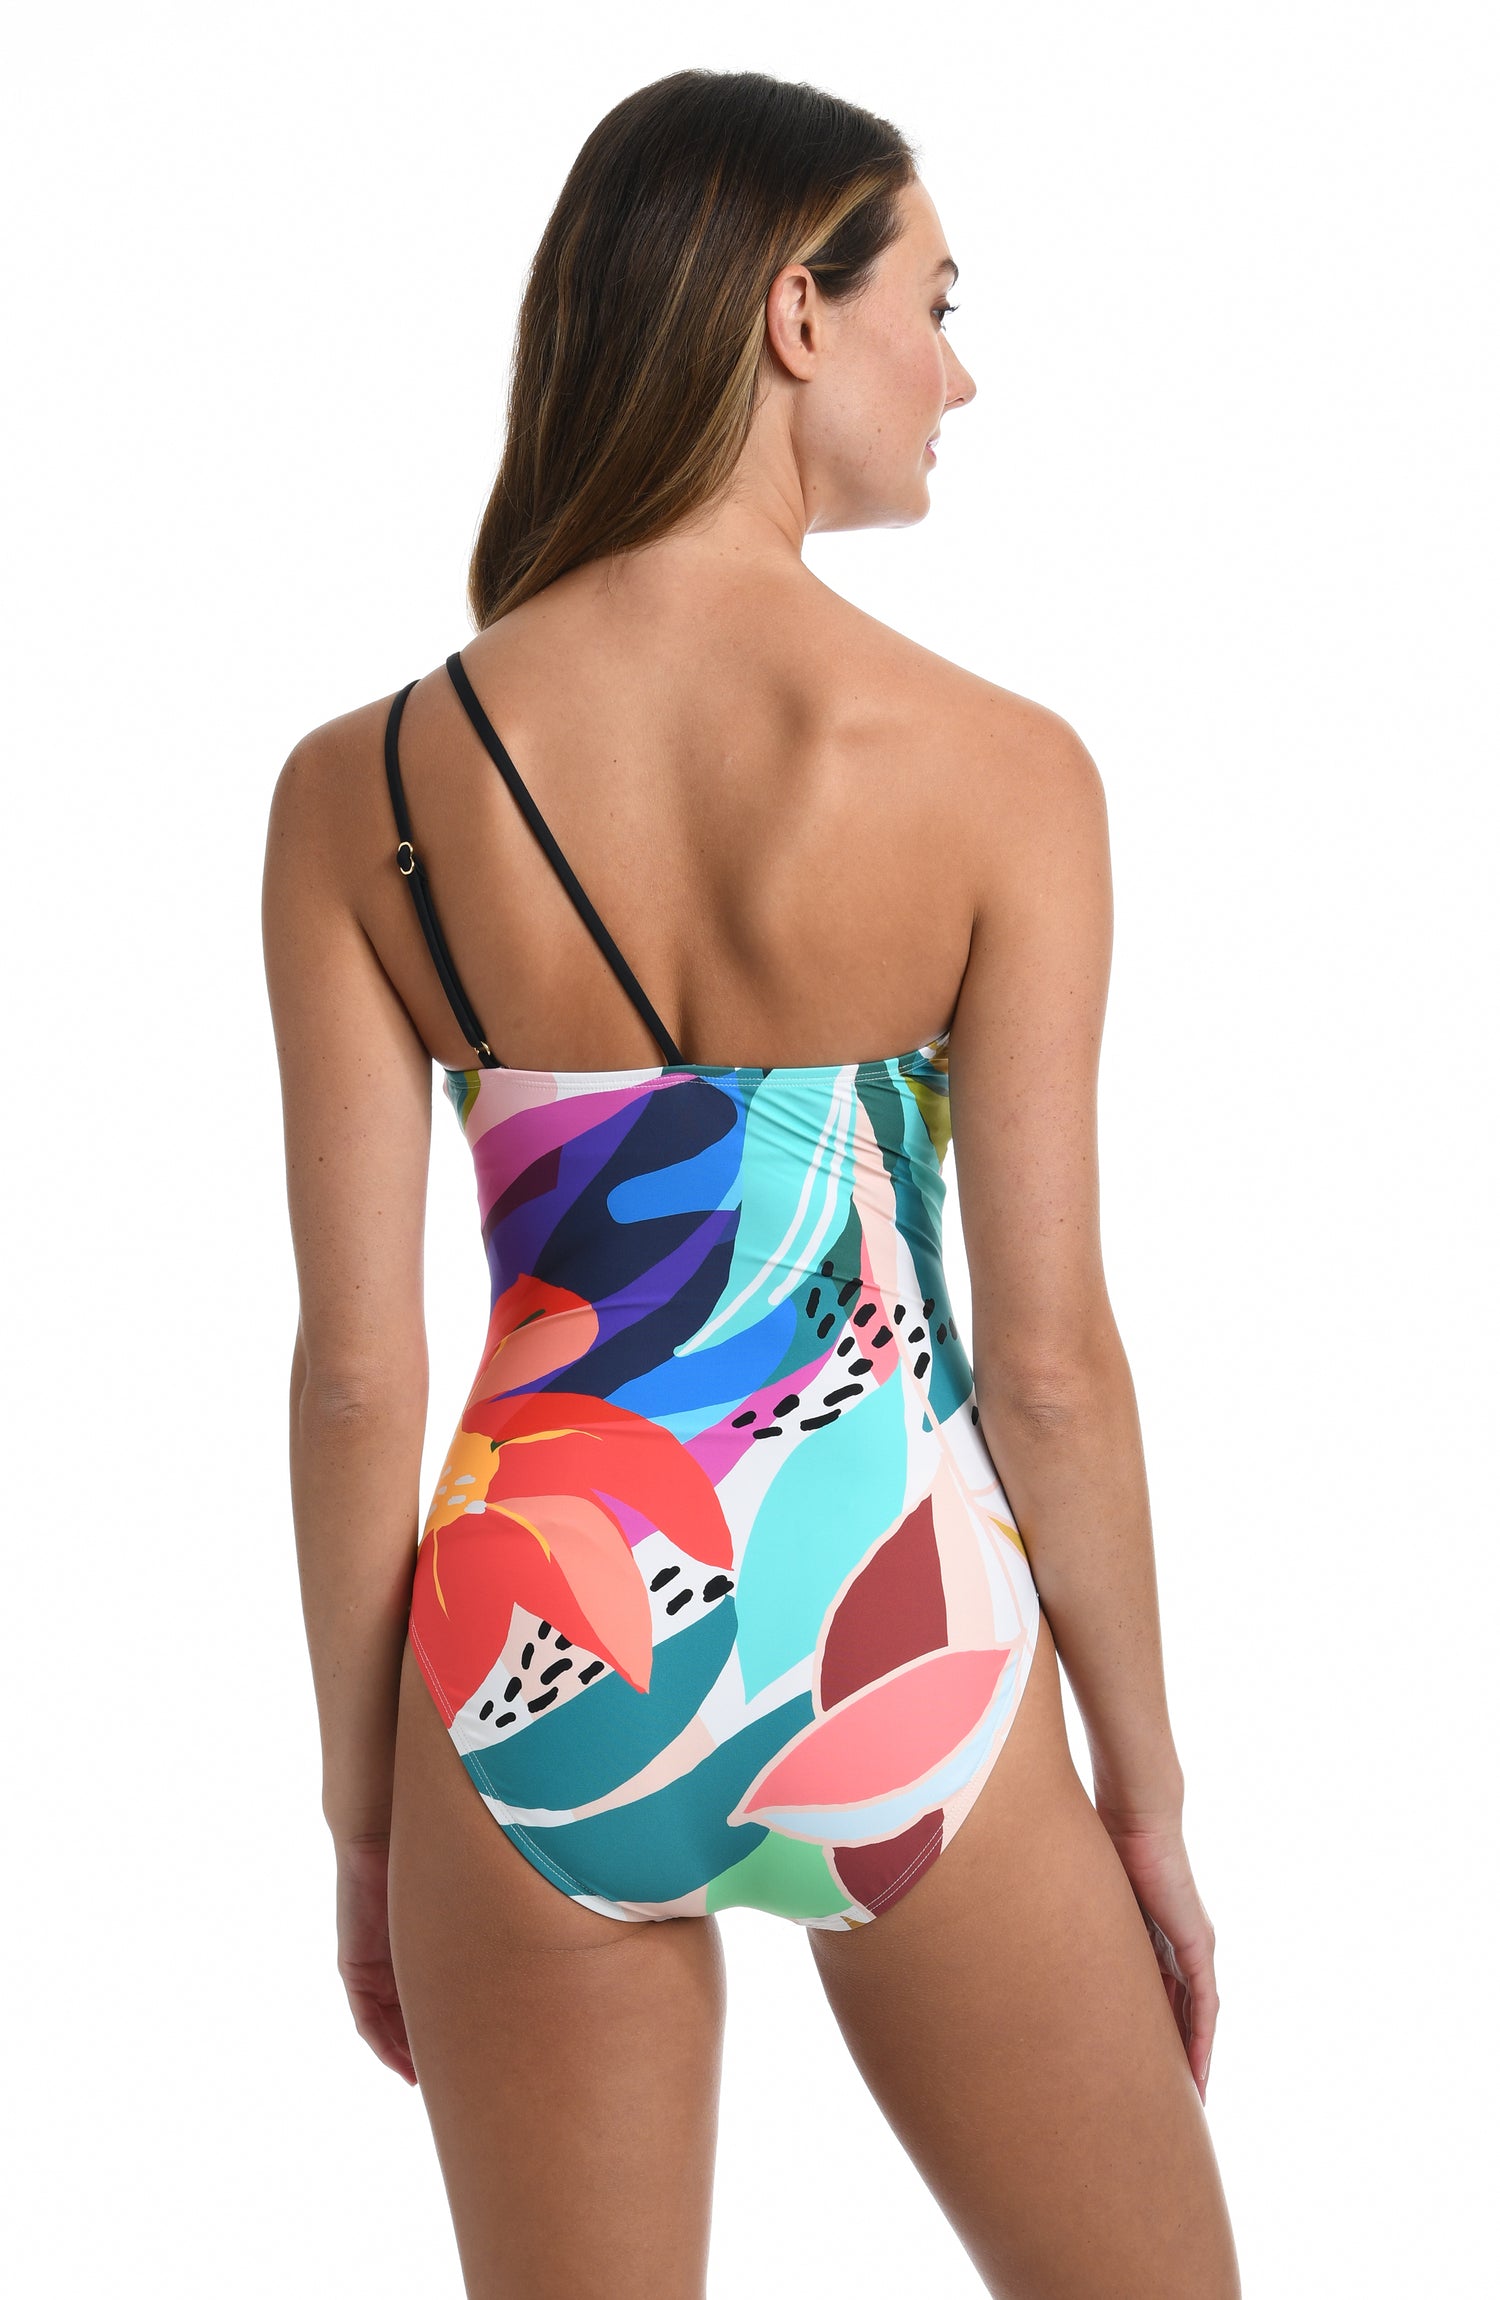 Model is wearing a multi colored tropical printed one piece swimsuit from our Eclectic Shore collection.